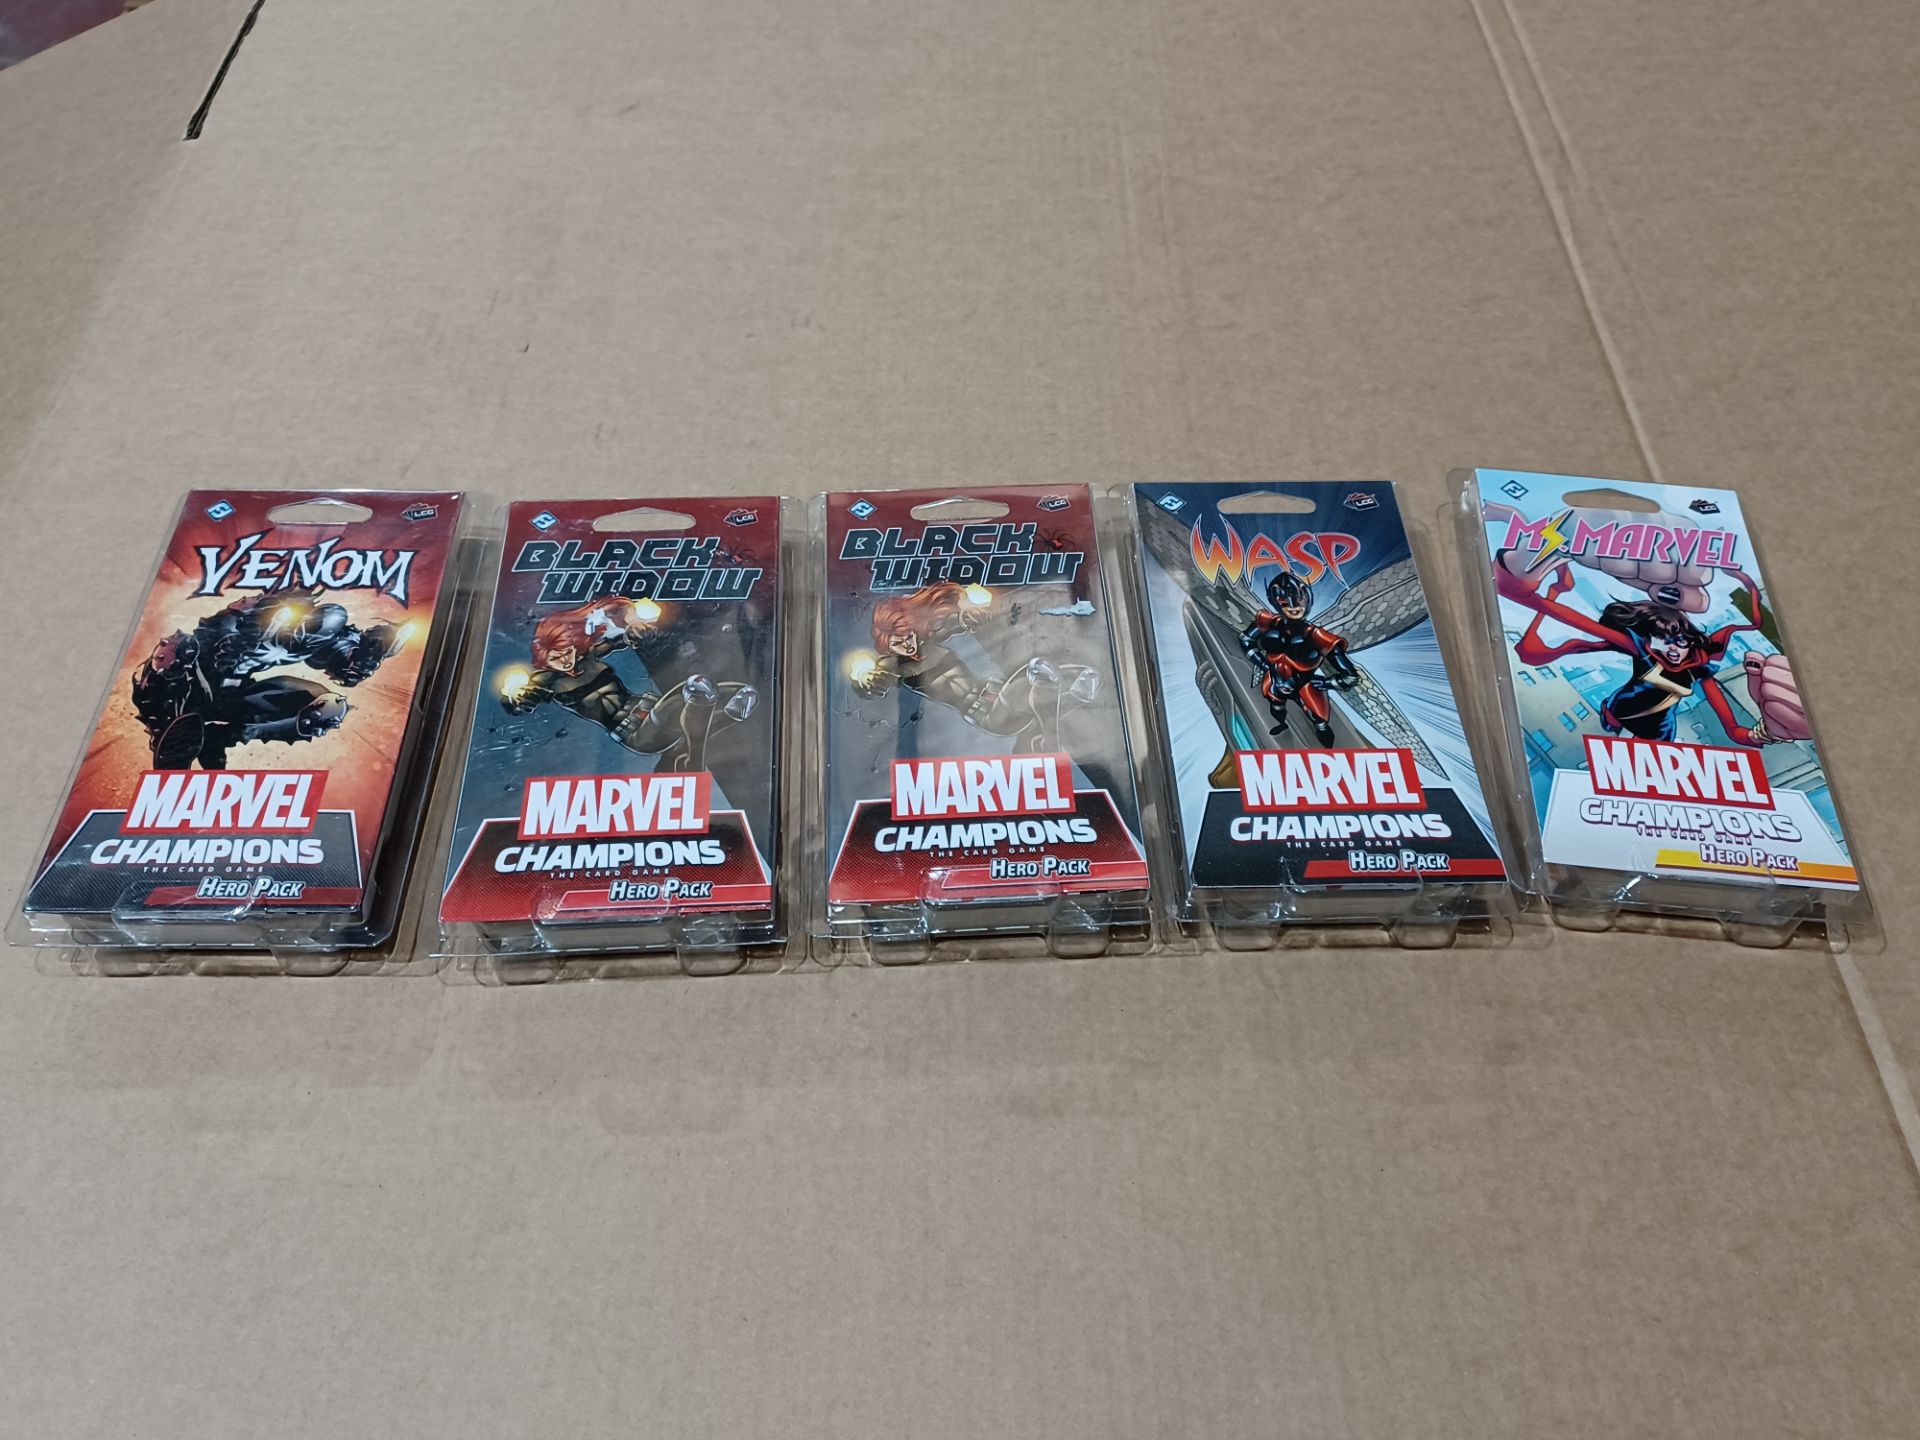 6 X MARVEL CHAMPIONS CARD GAME HERO PACK TO INCLUDE; BLACK WIDOW, WASP, BLACK WIDOW AND MORE RRP £